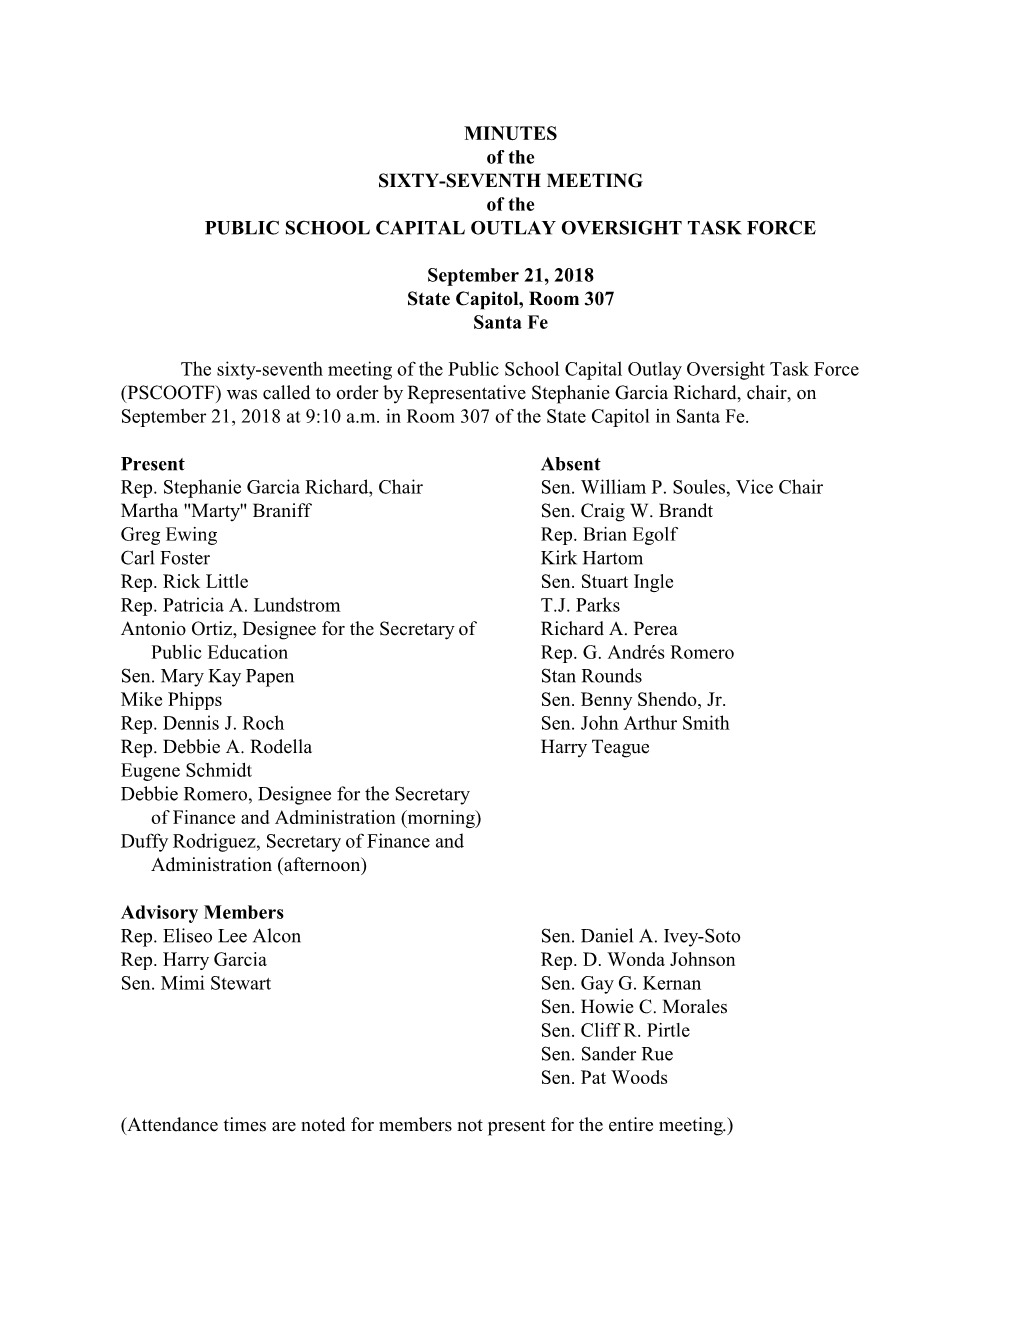 MINUTES of the SIXTY-SEVENTH MEETING of the PUBLIC SCHOOL CAPITAL OUTLAY OVERSIGHT TASK FORCE